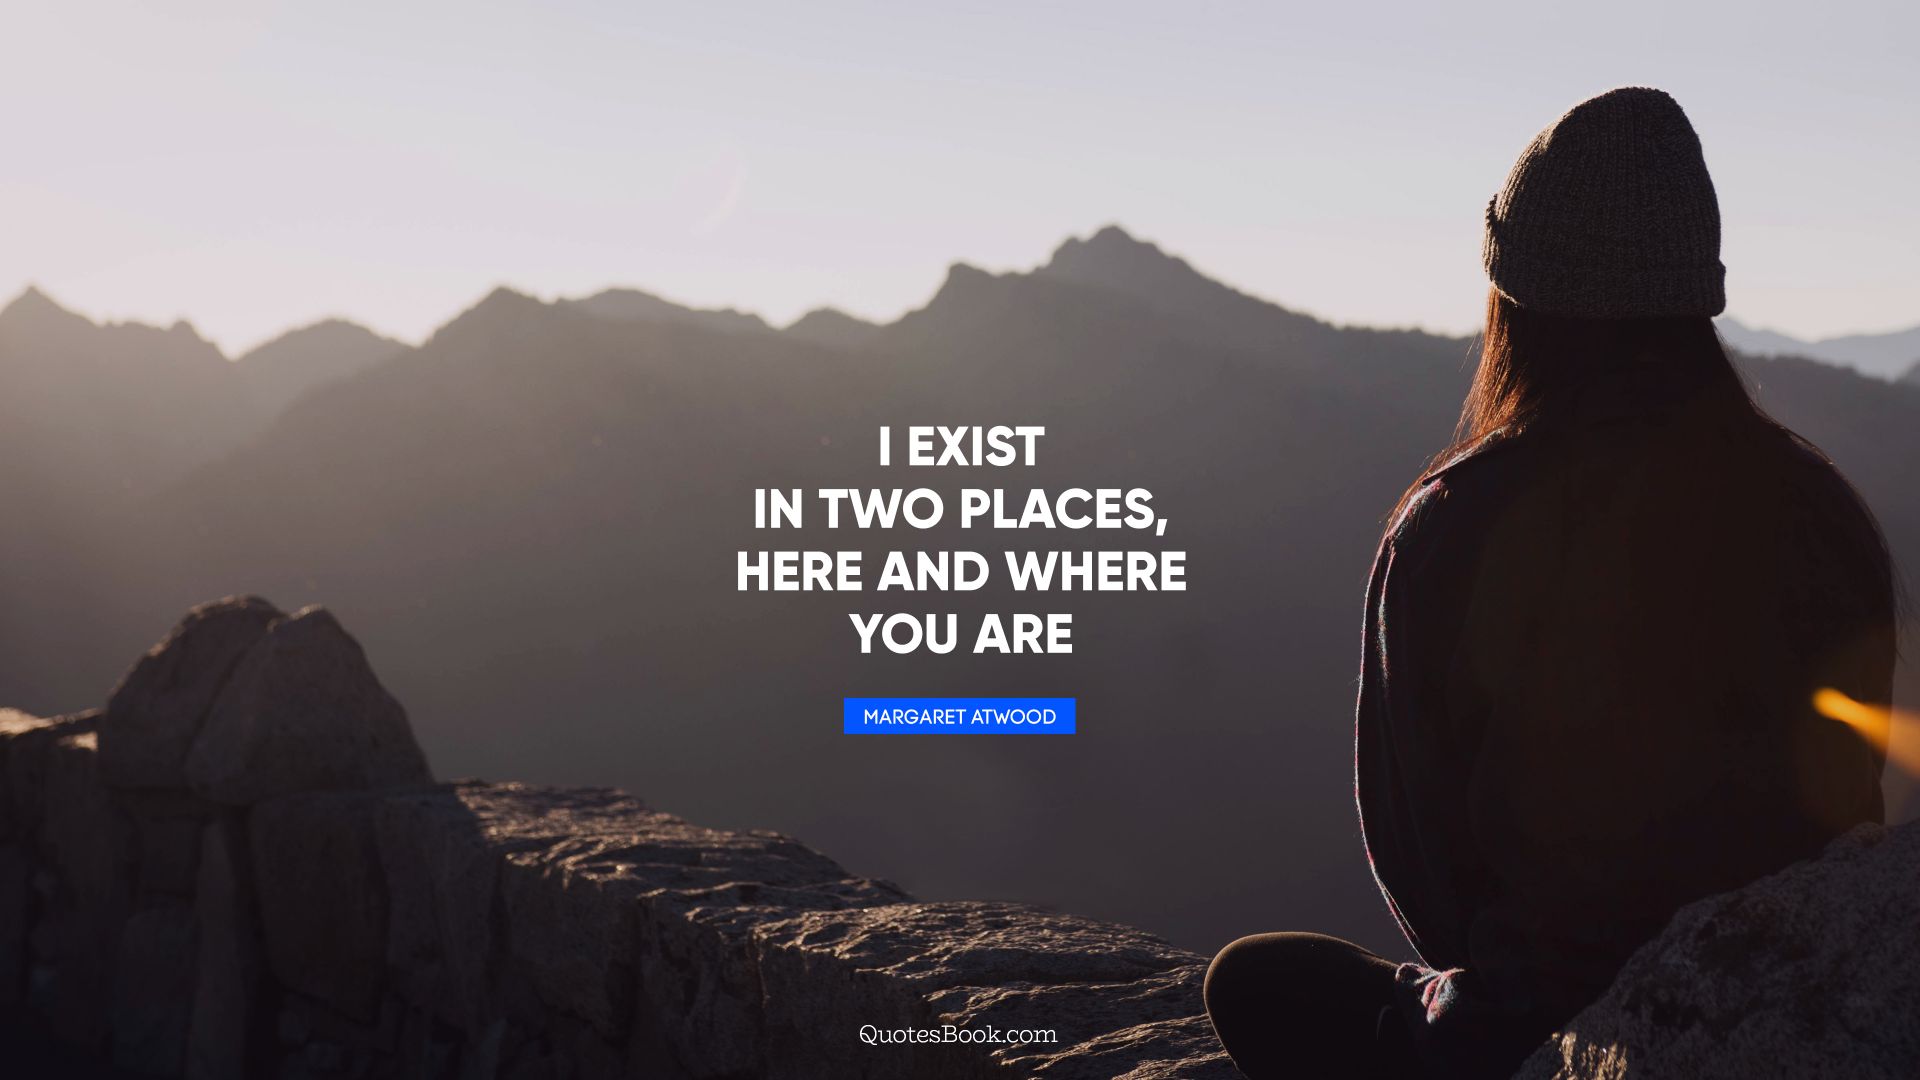 I exist in two places, here and where you are. - Quote by Margaret Atwood